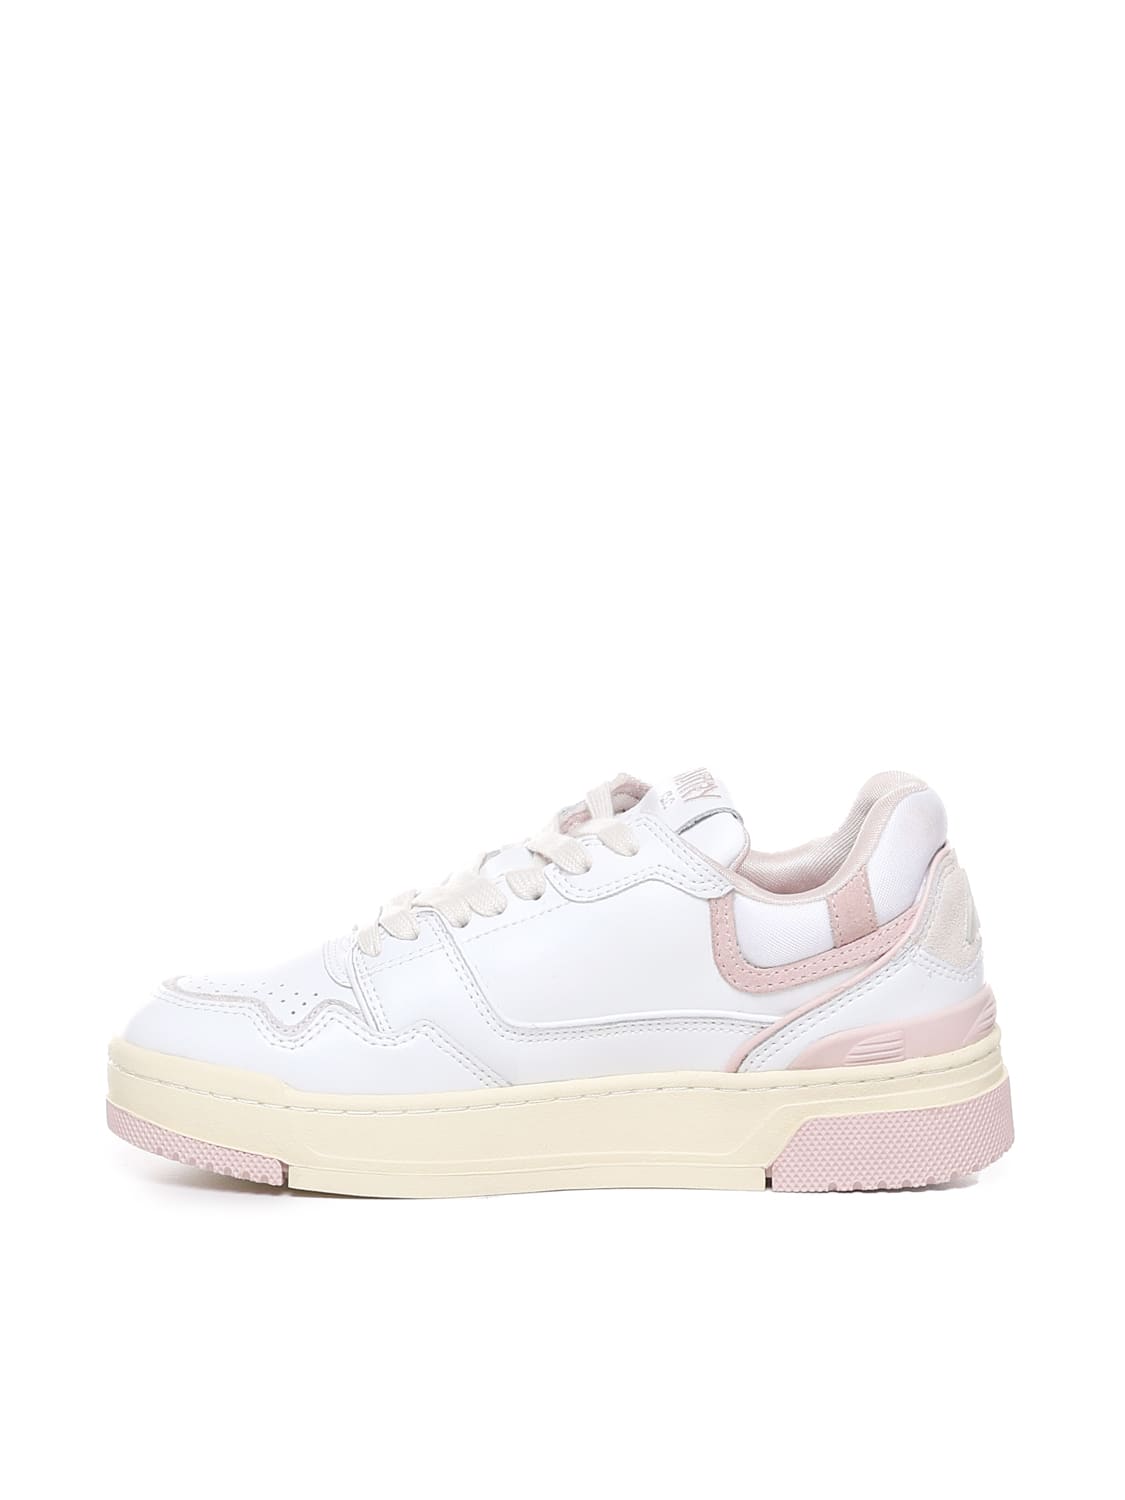 Shop Autry Leather Clc Sneakers In White, Pink